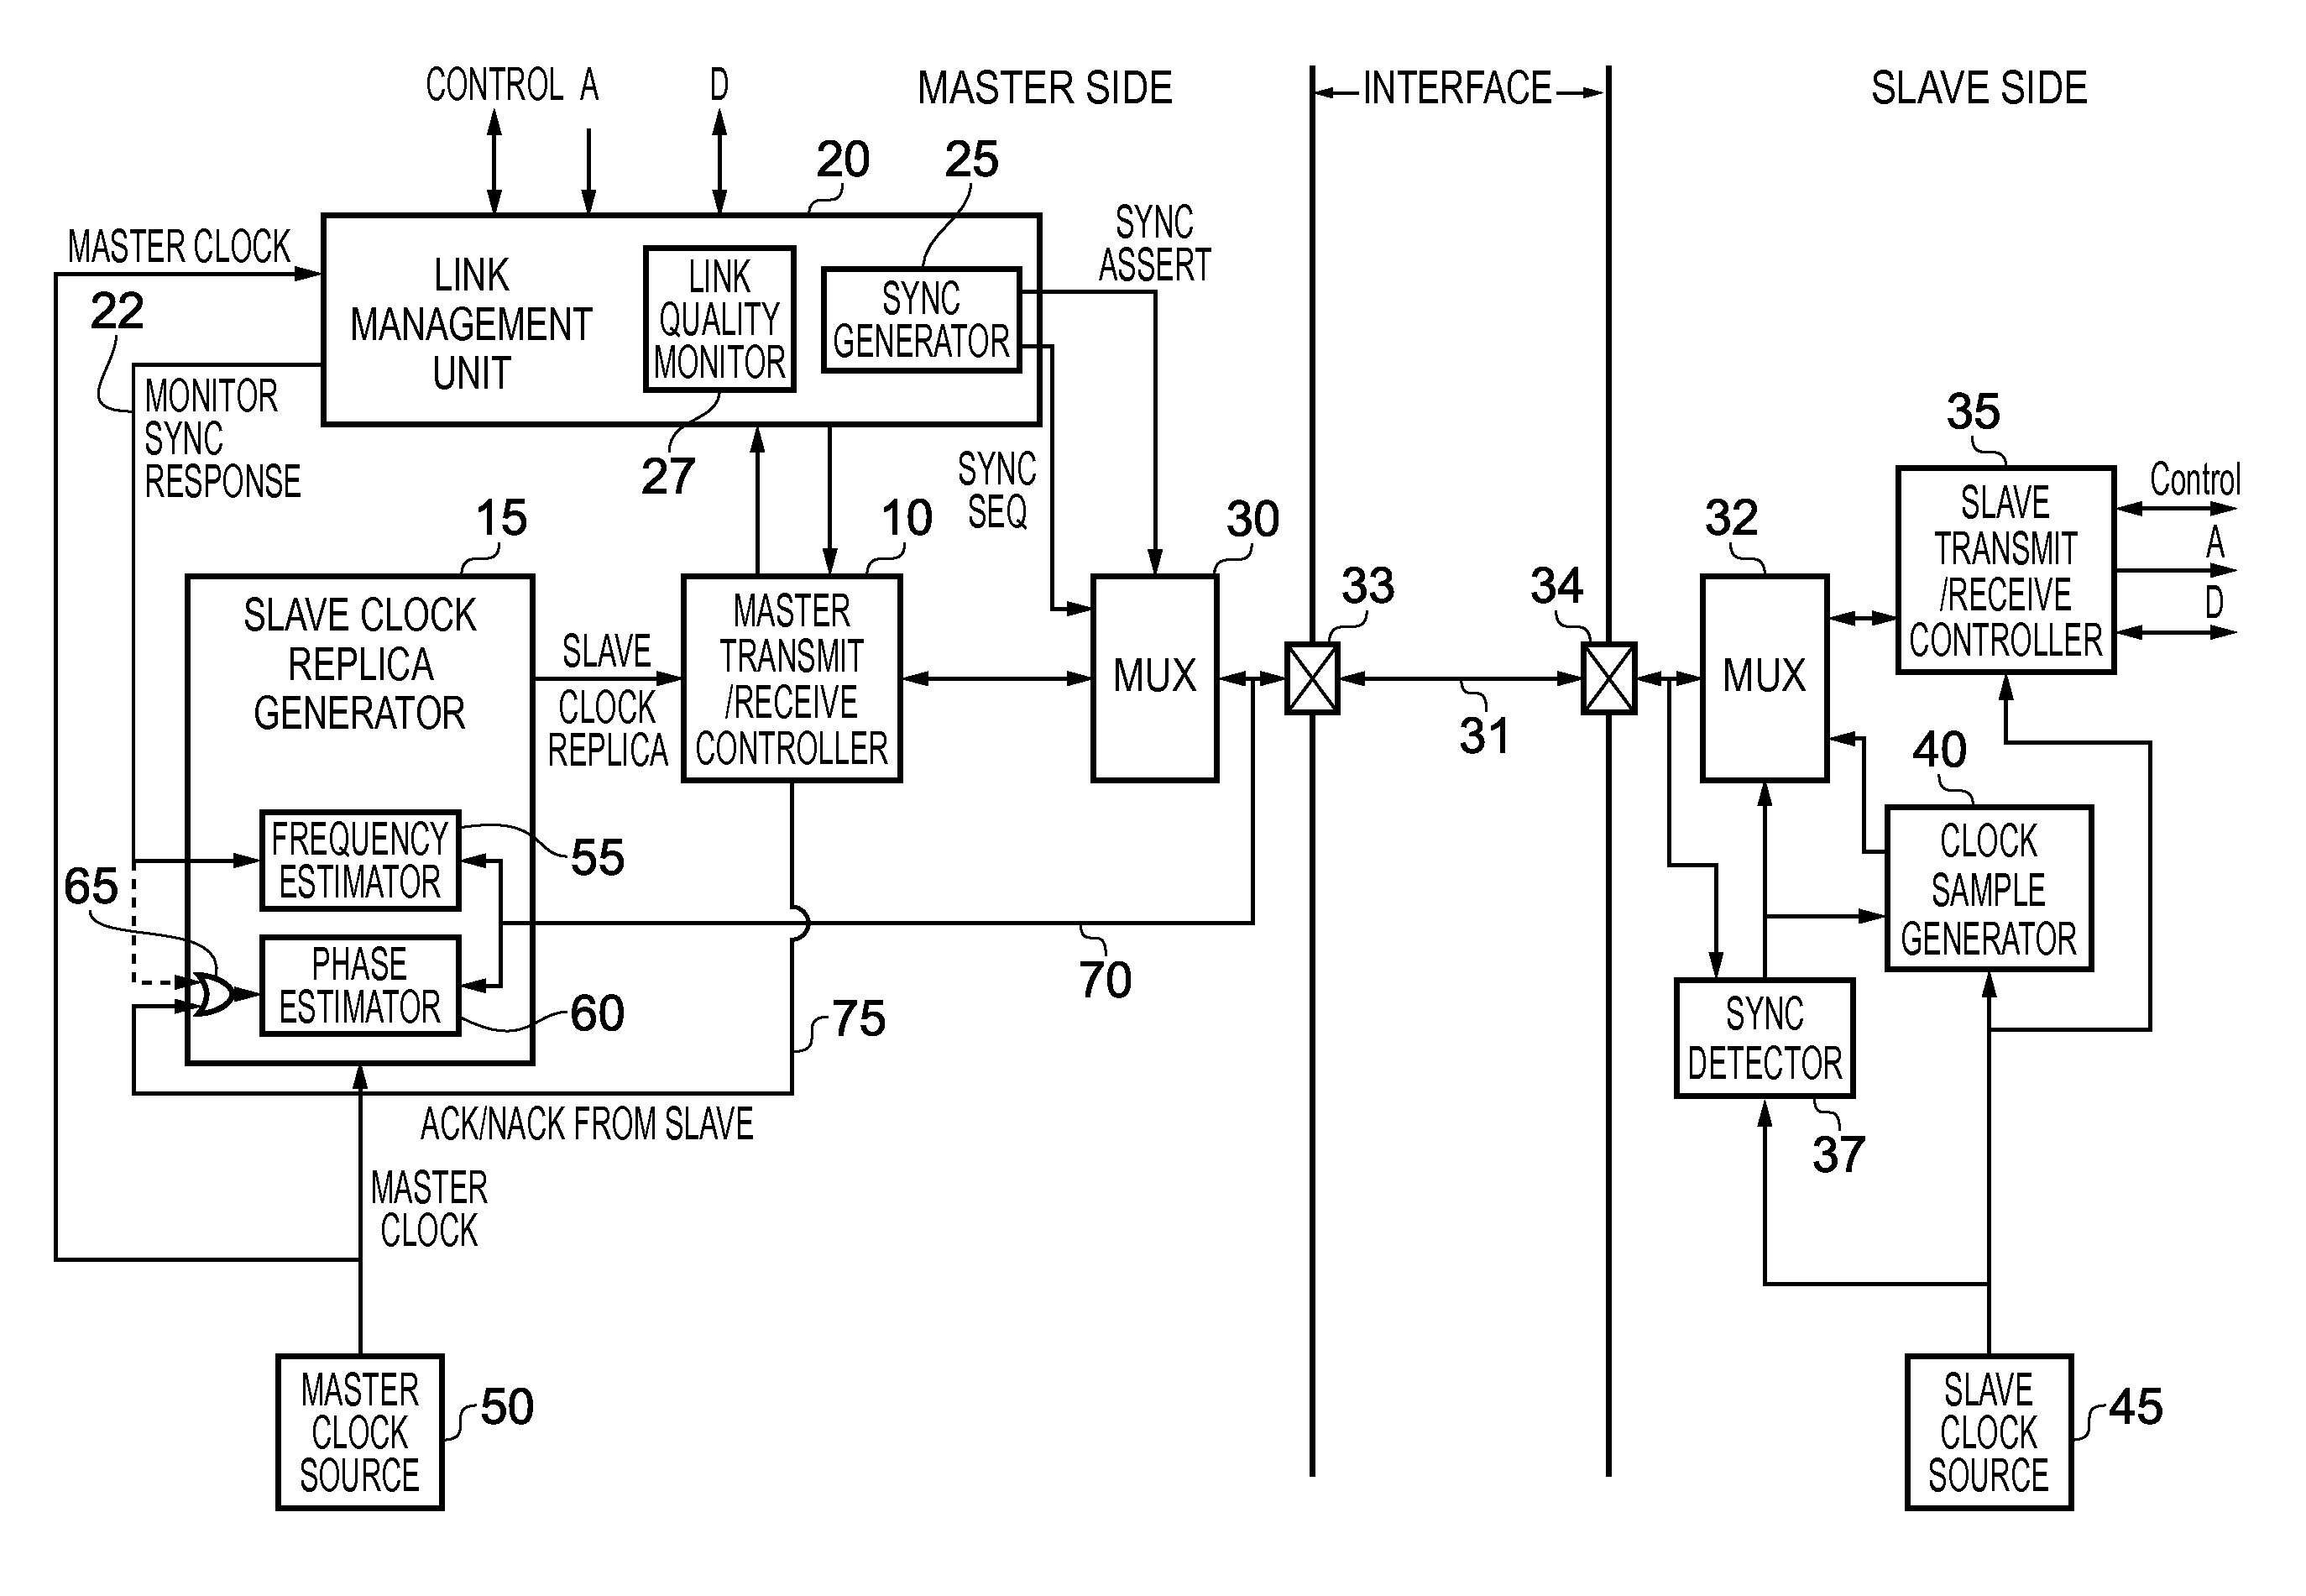 Data processing apparatus and method for communicating between a master device and an asychronous slave device via an interface